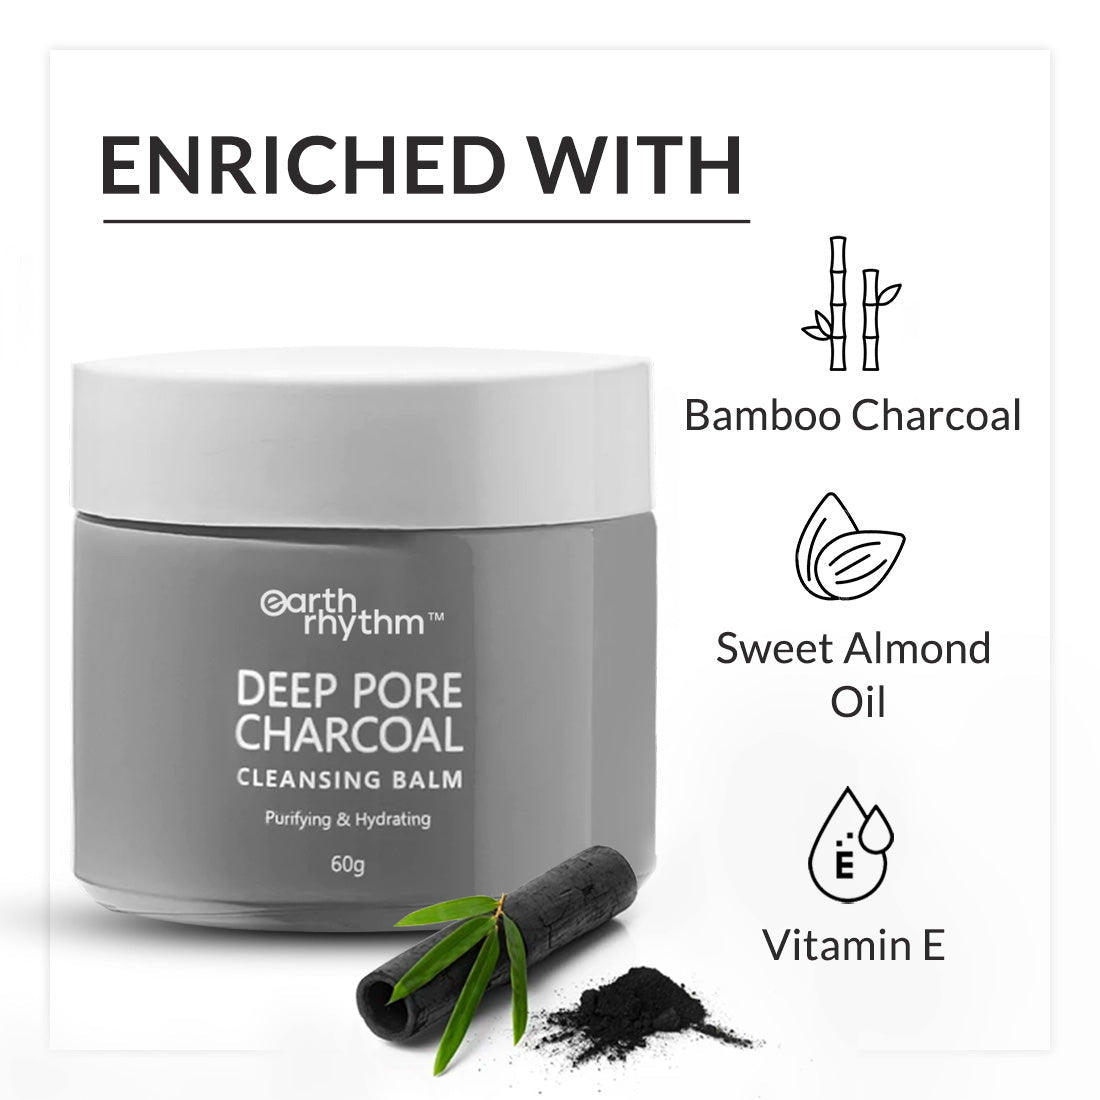 deep pore charcoal cleansing balm ingredients